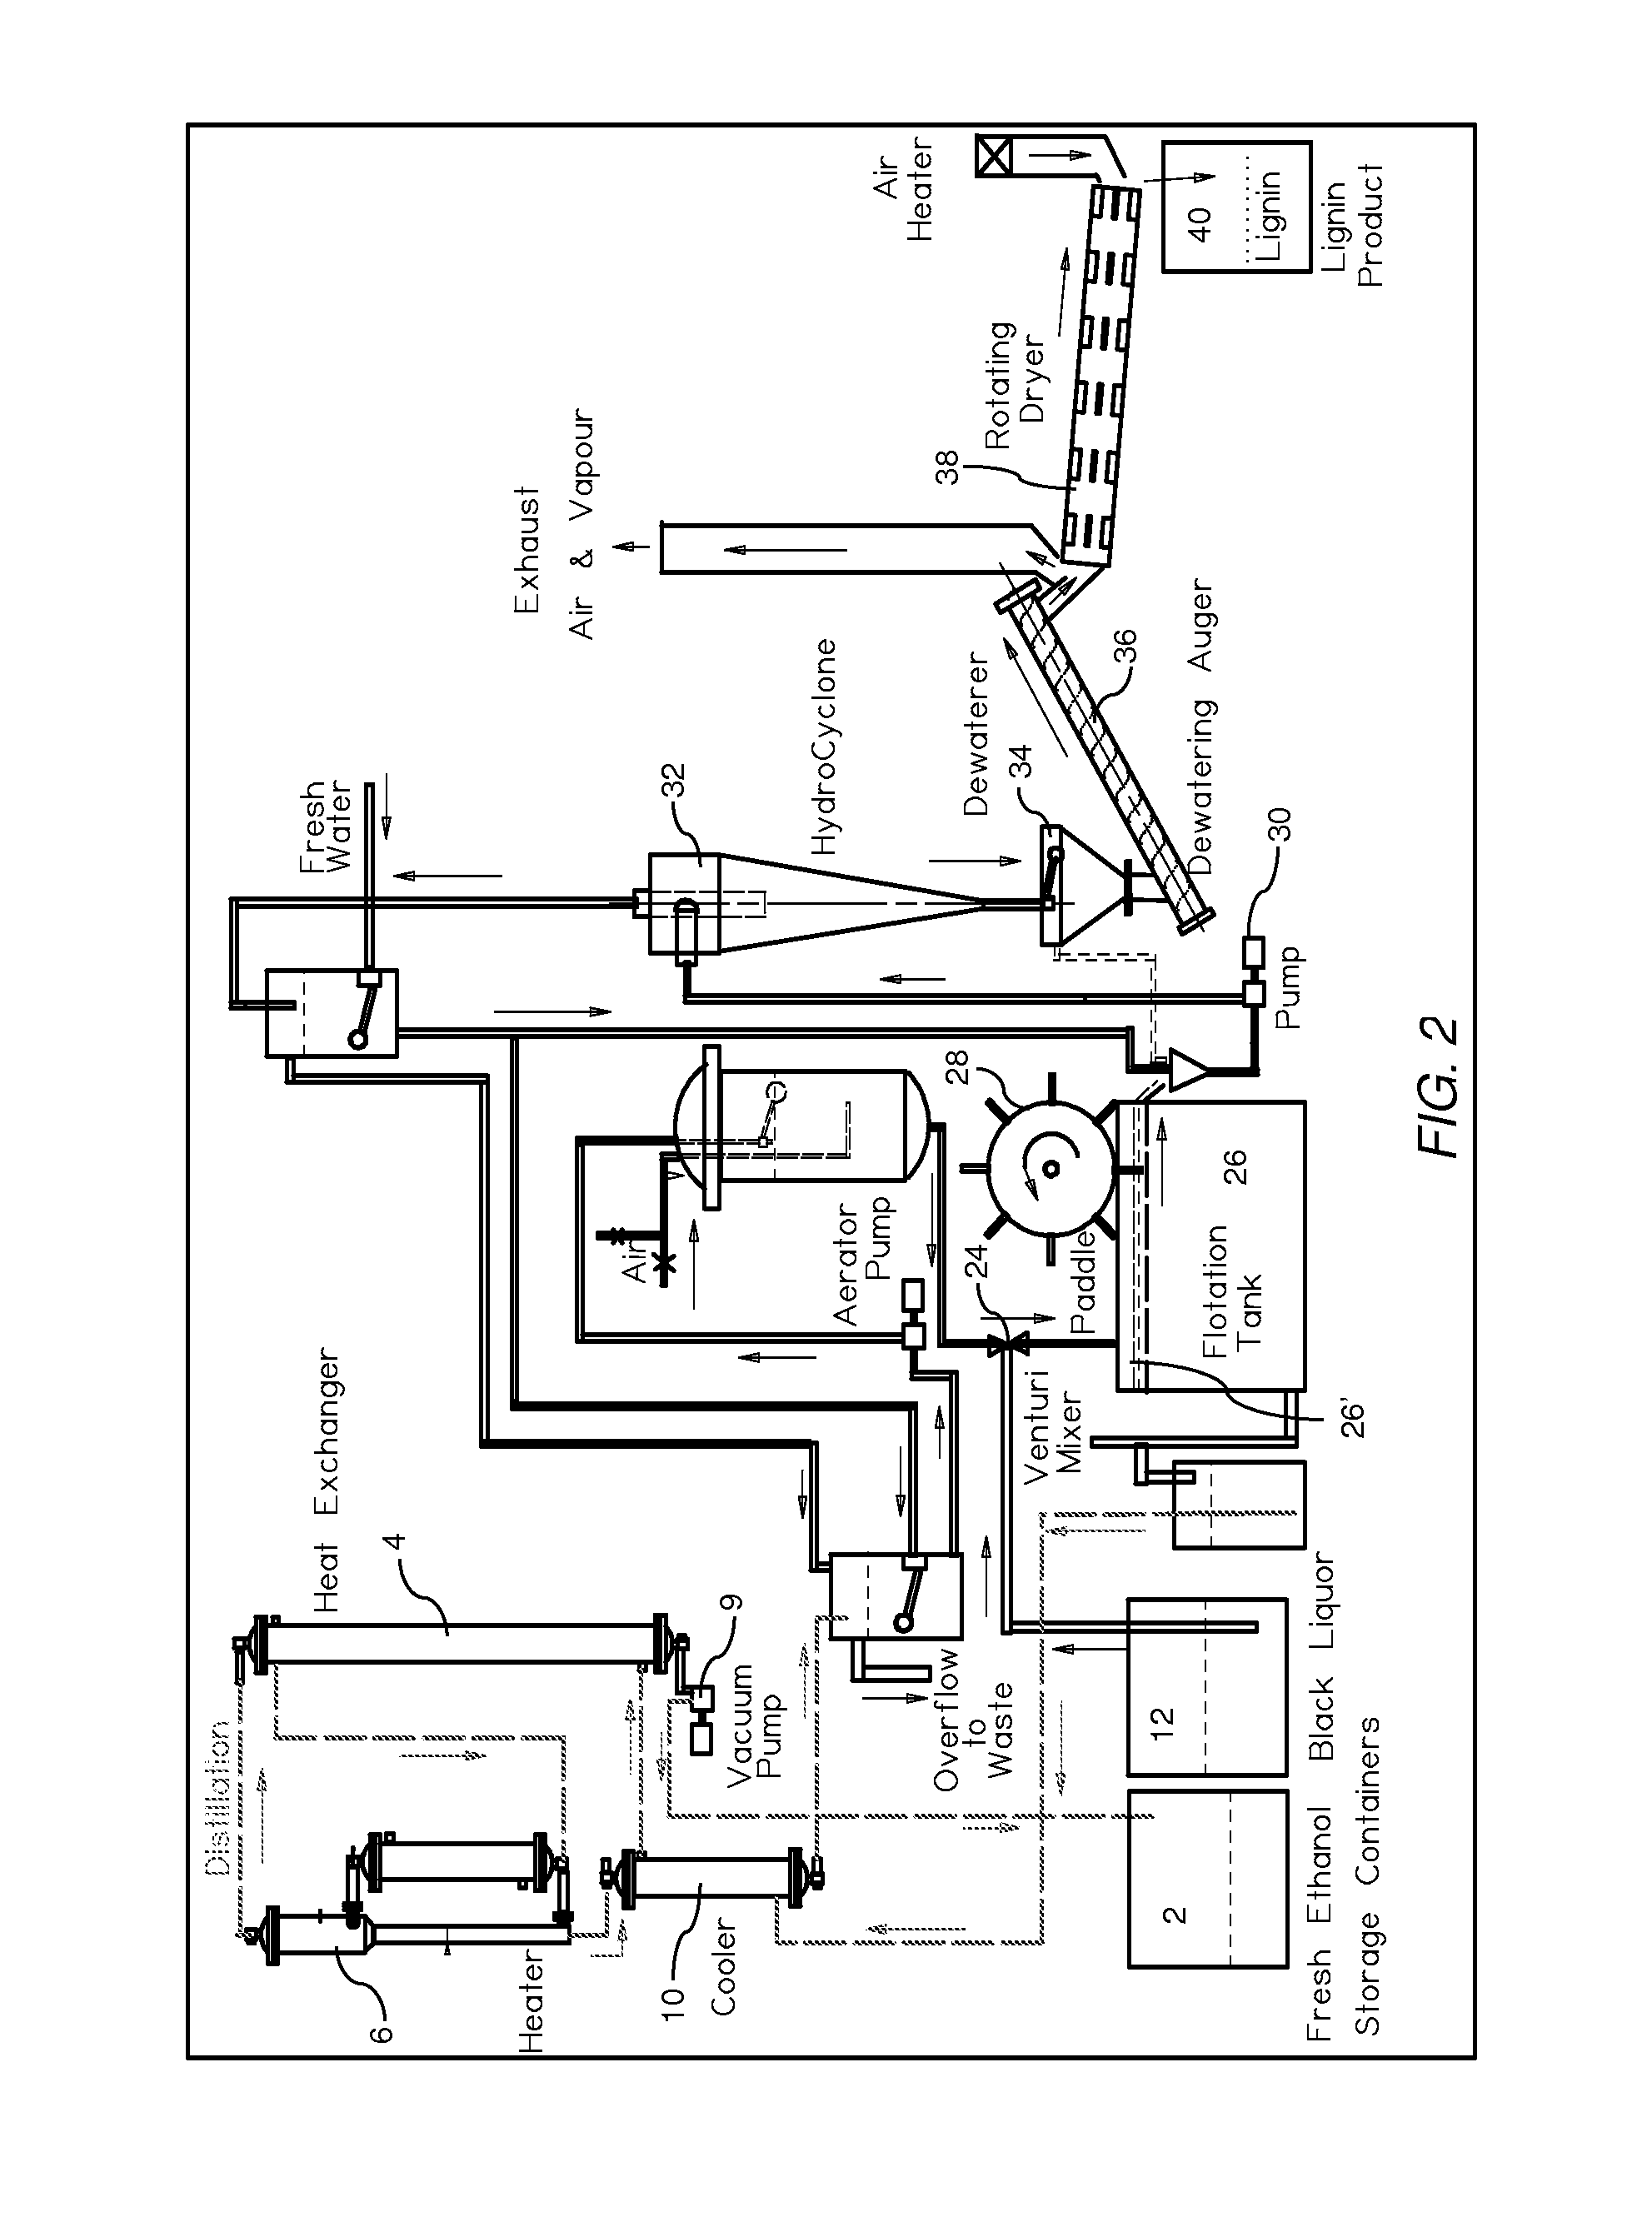 Methods and systems for processing plants and converting cellulosic residue to crude bio-oils